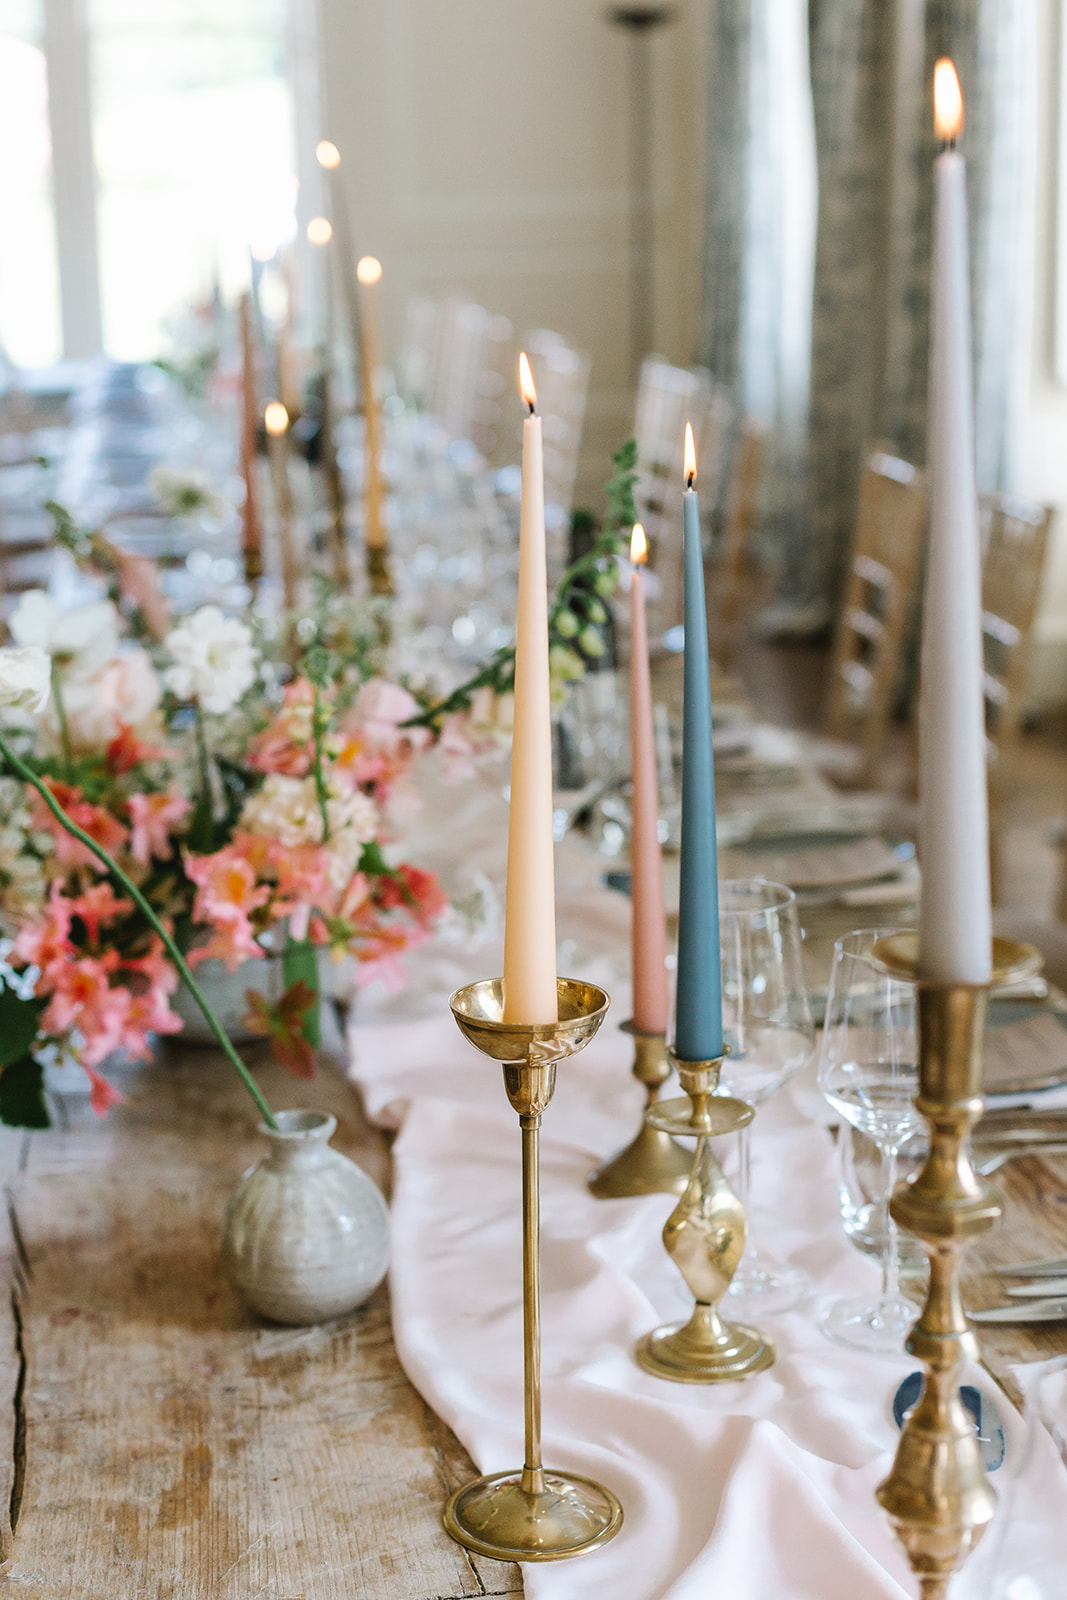 Tapered candles to compliment the blush wedding flowers